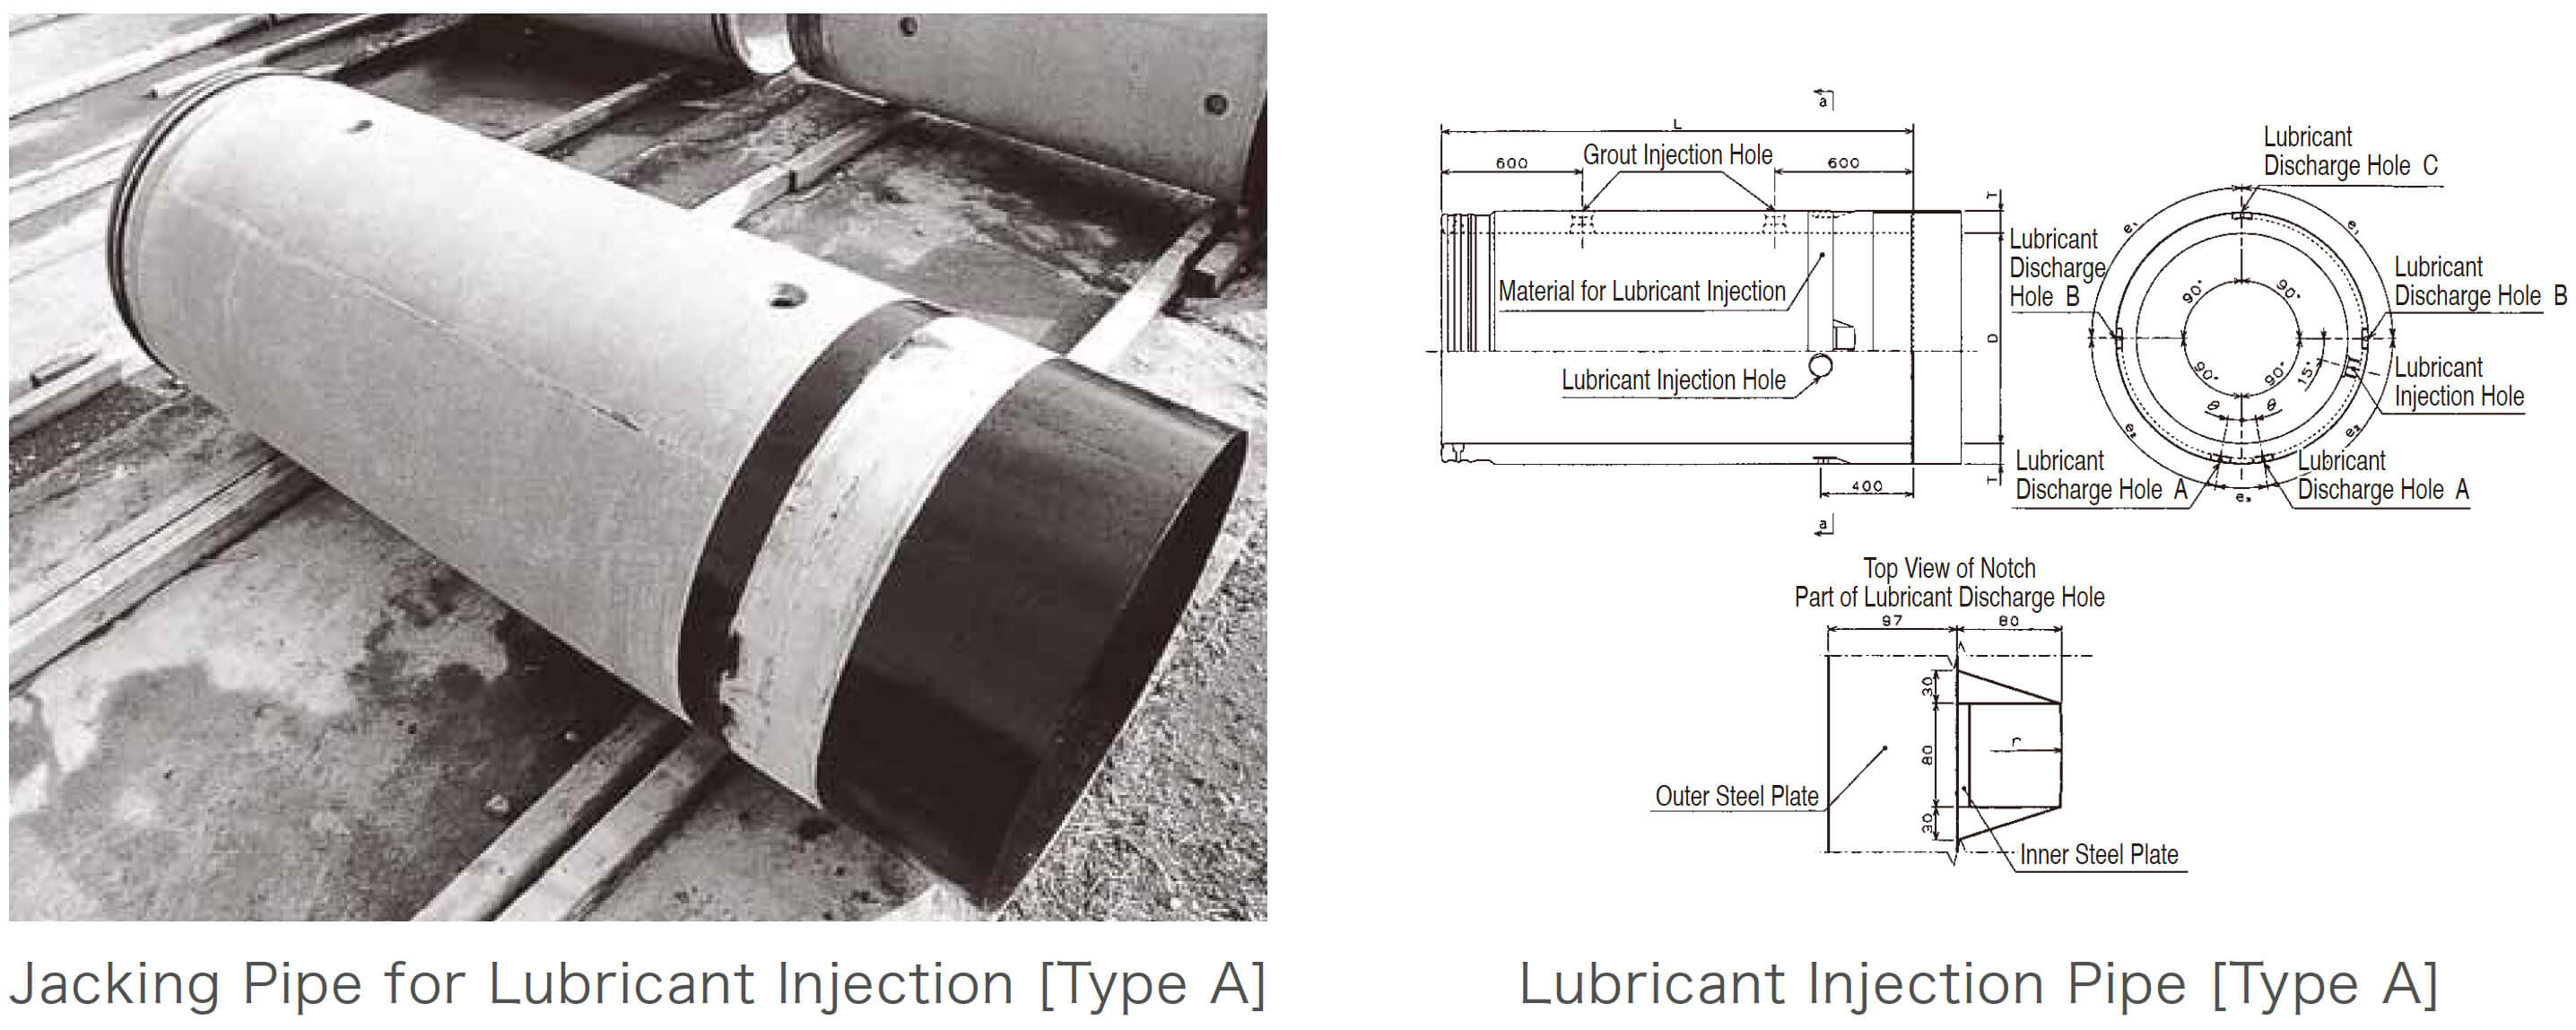 Jacking Pipe for Lubricant Injection